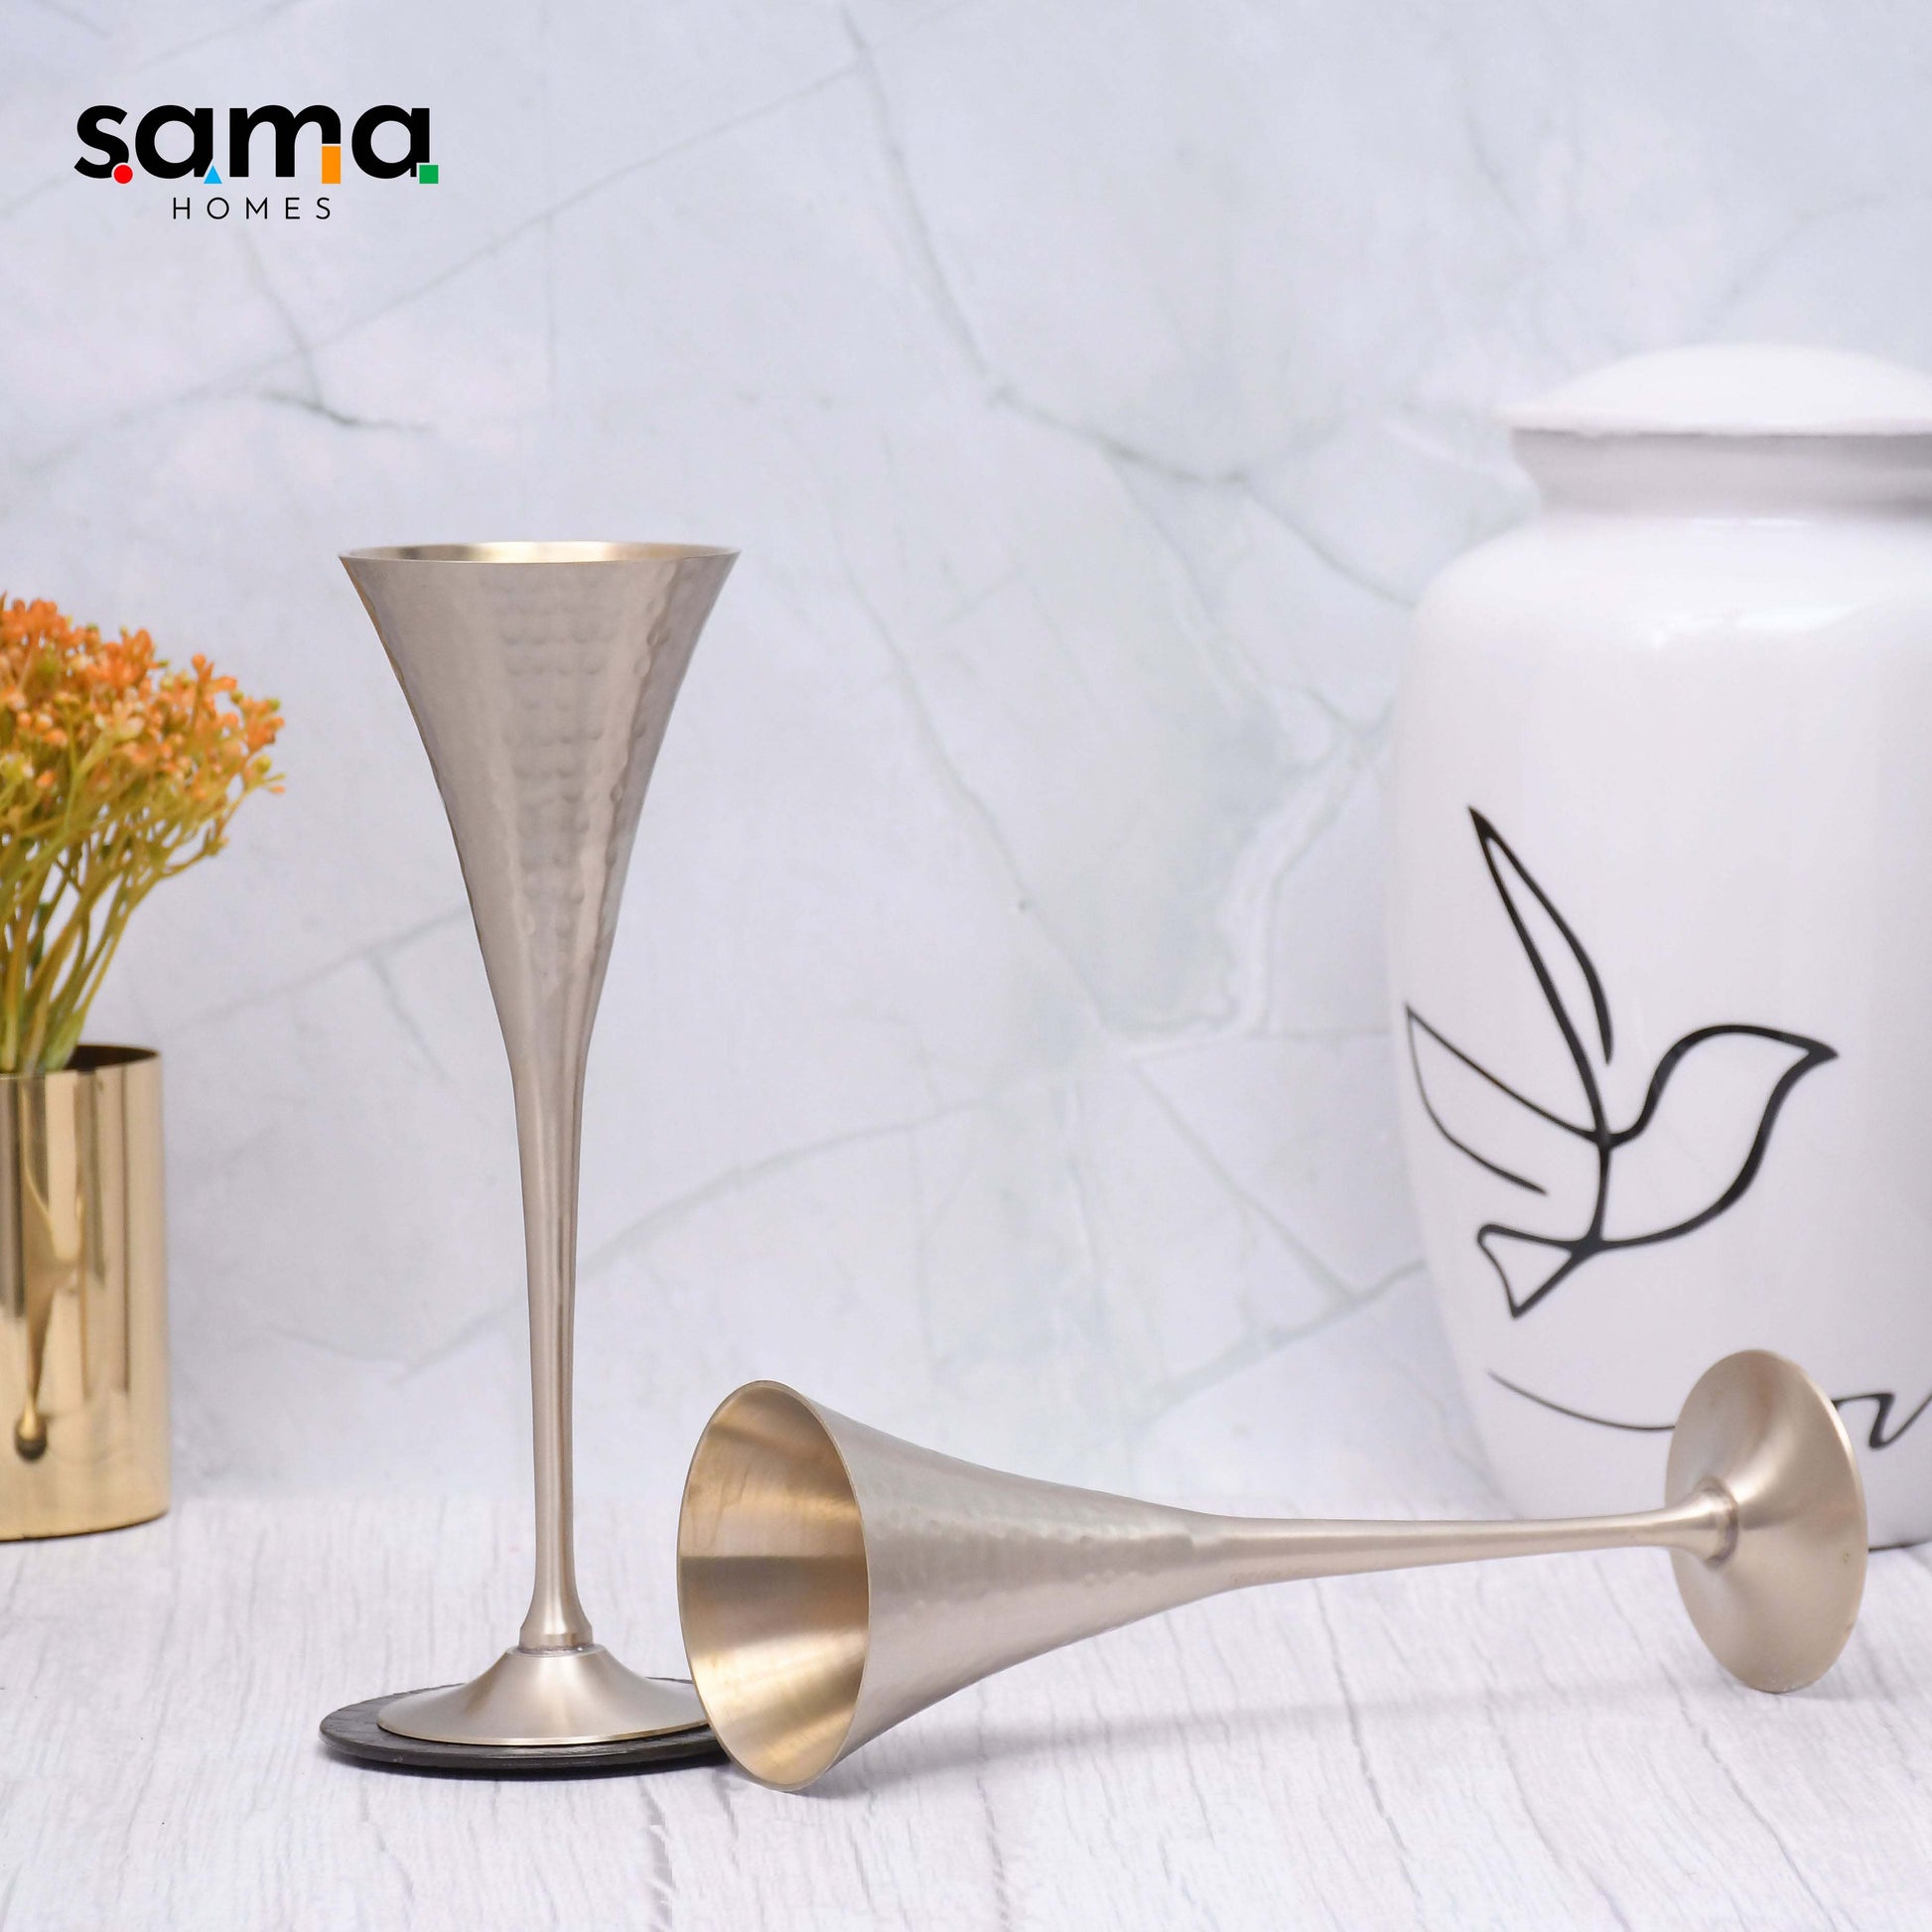 SAMA Homes - beautifully designed conical brass finished goblet glasses set of 2